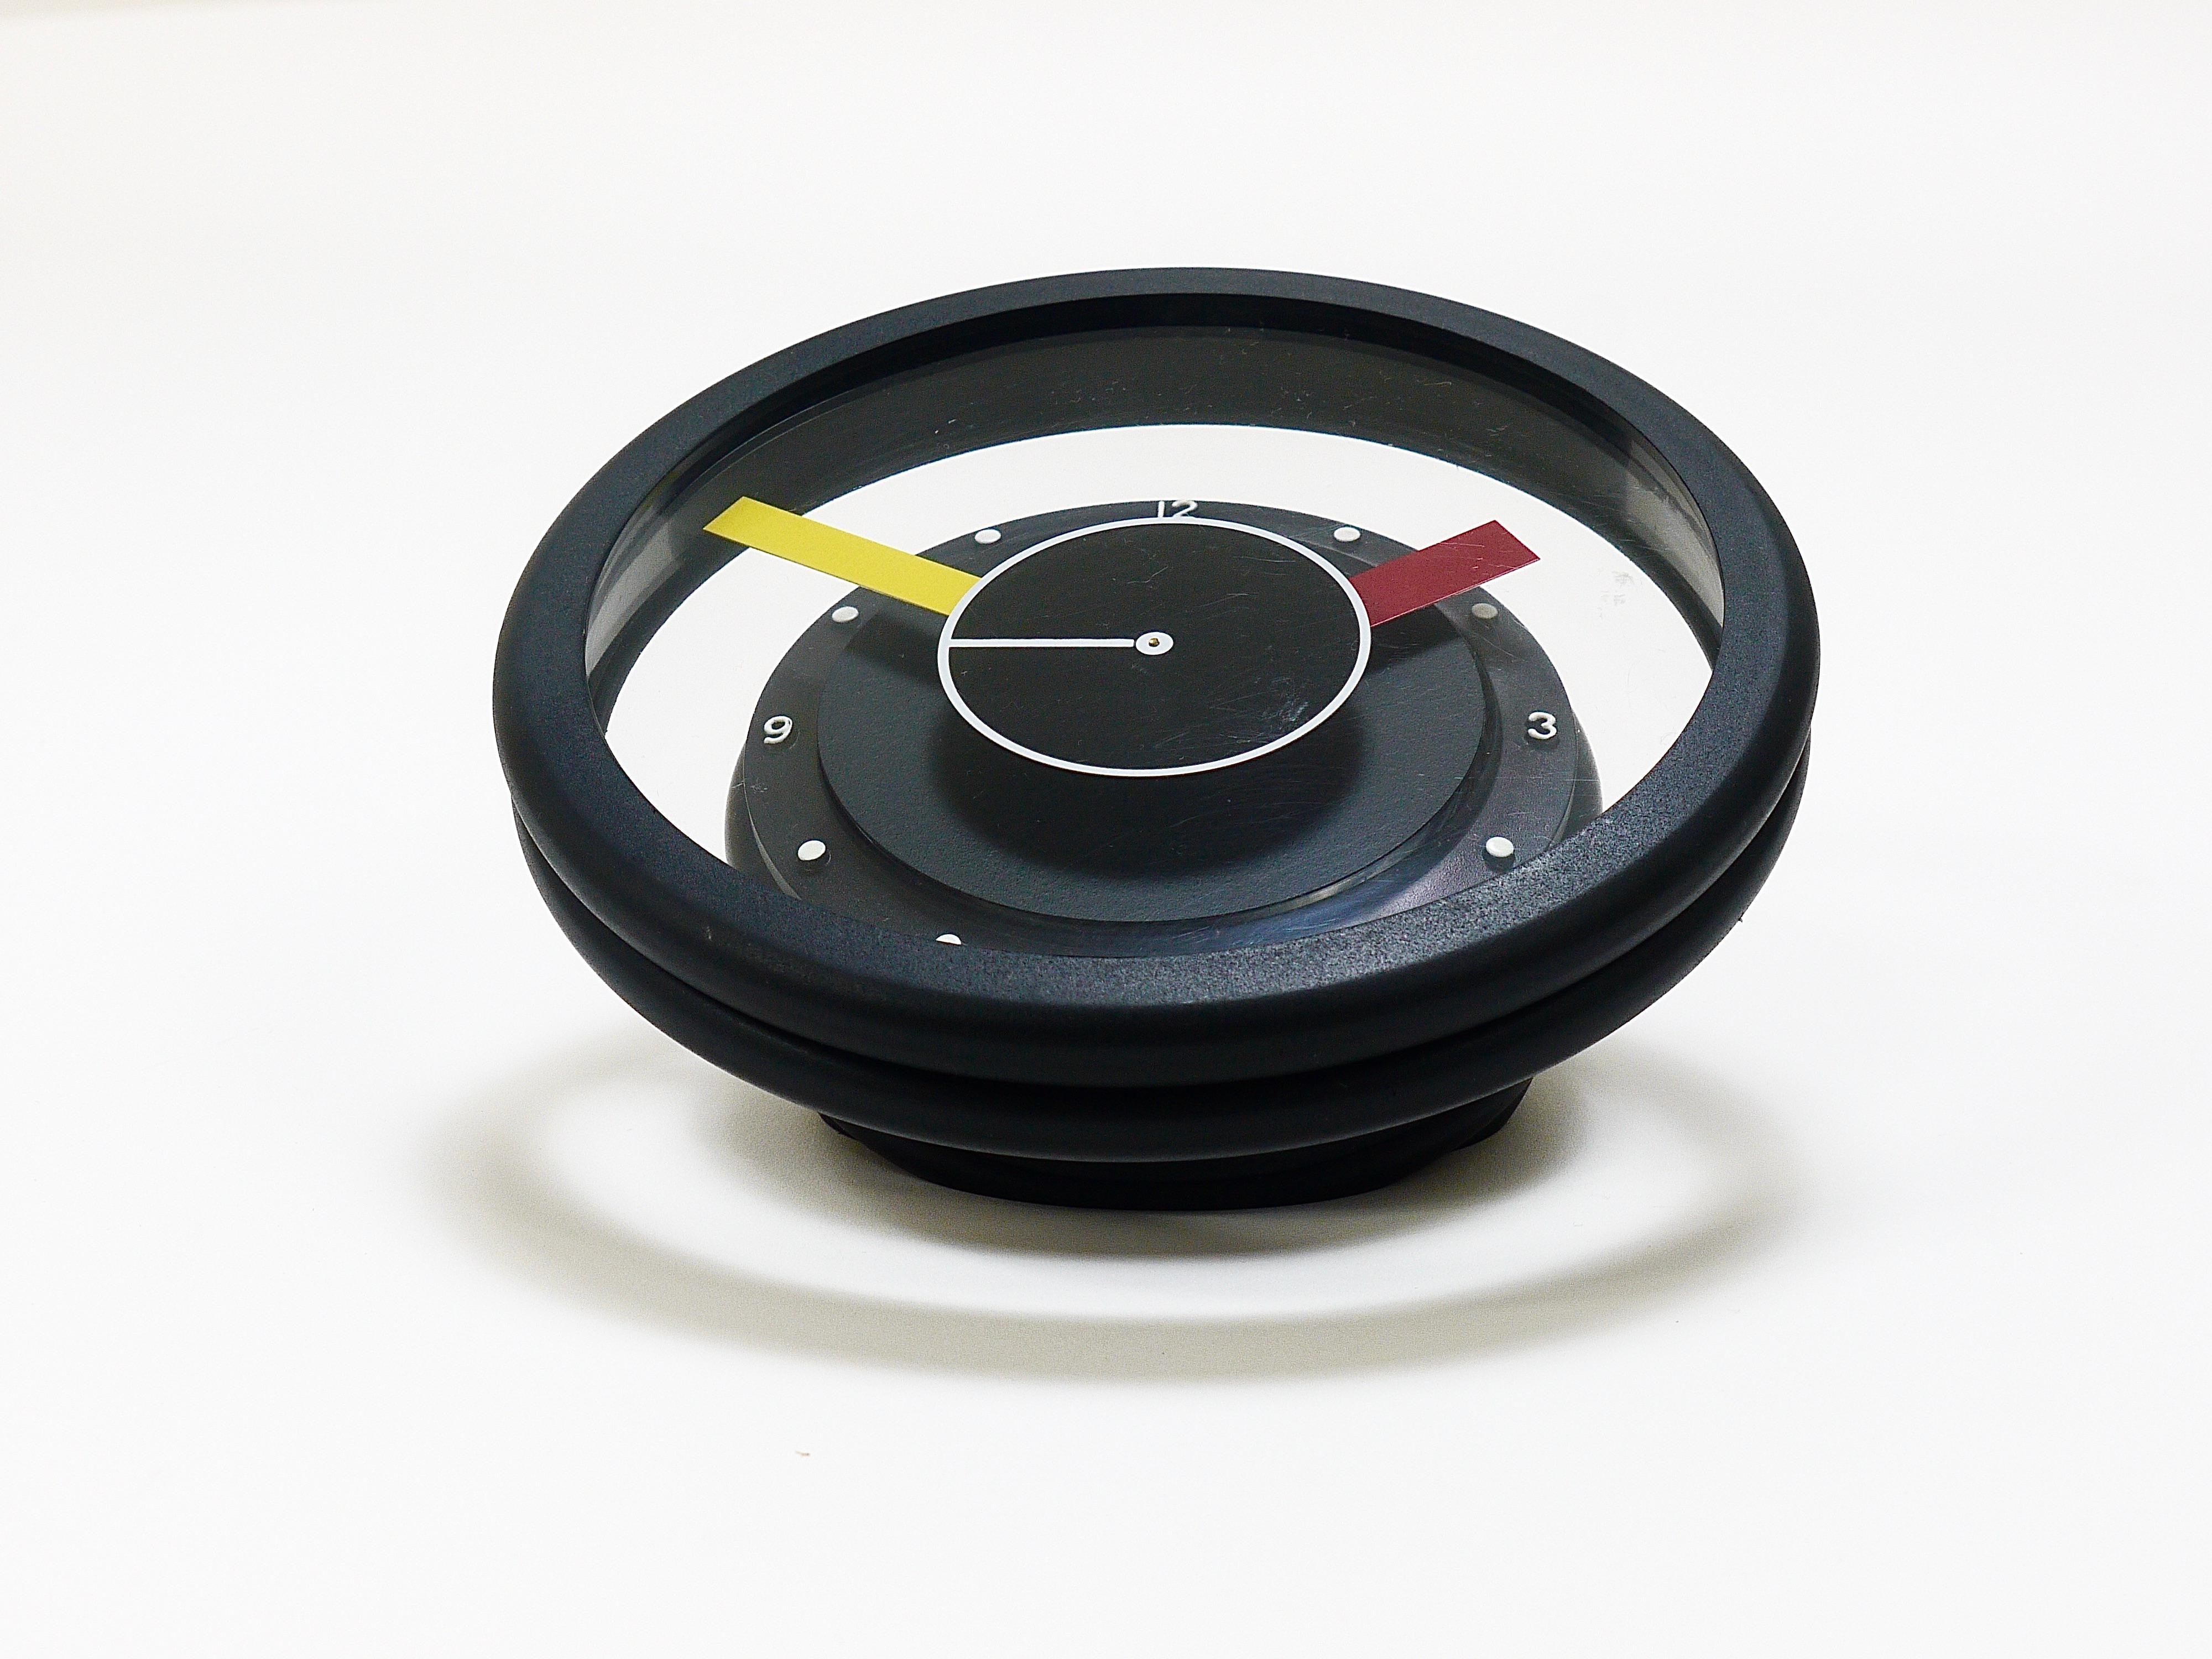 Postmodern Round Pop Art Desk or Table Clock, Memphis Milano Style, Italy, 1990s For Sale 10